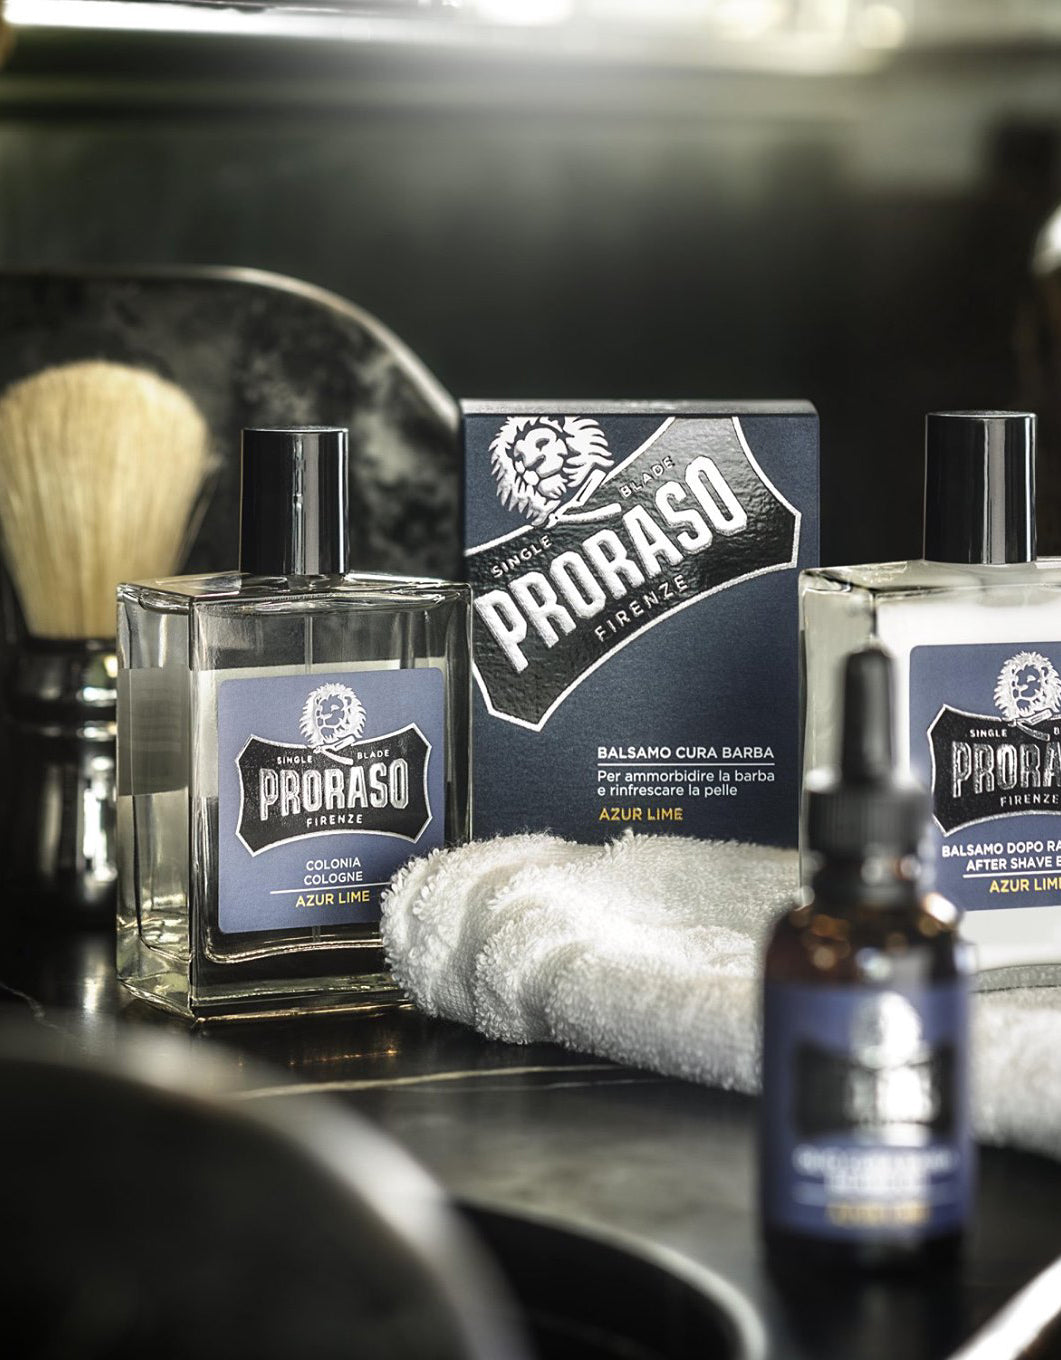 Proraso - Cologne, Azur Lime, 100ml - The Panic Room